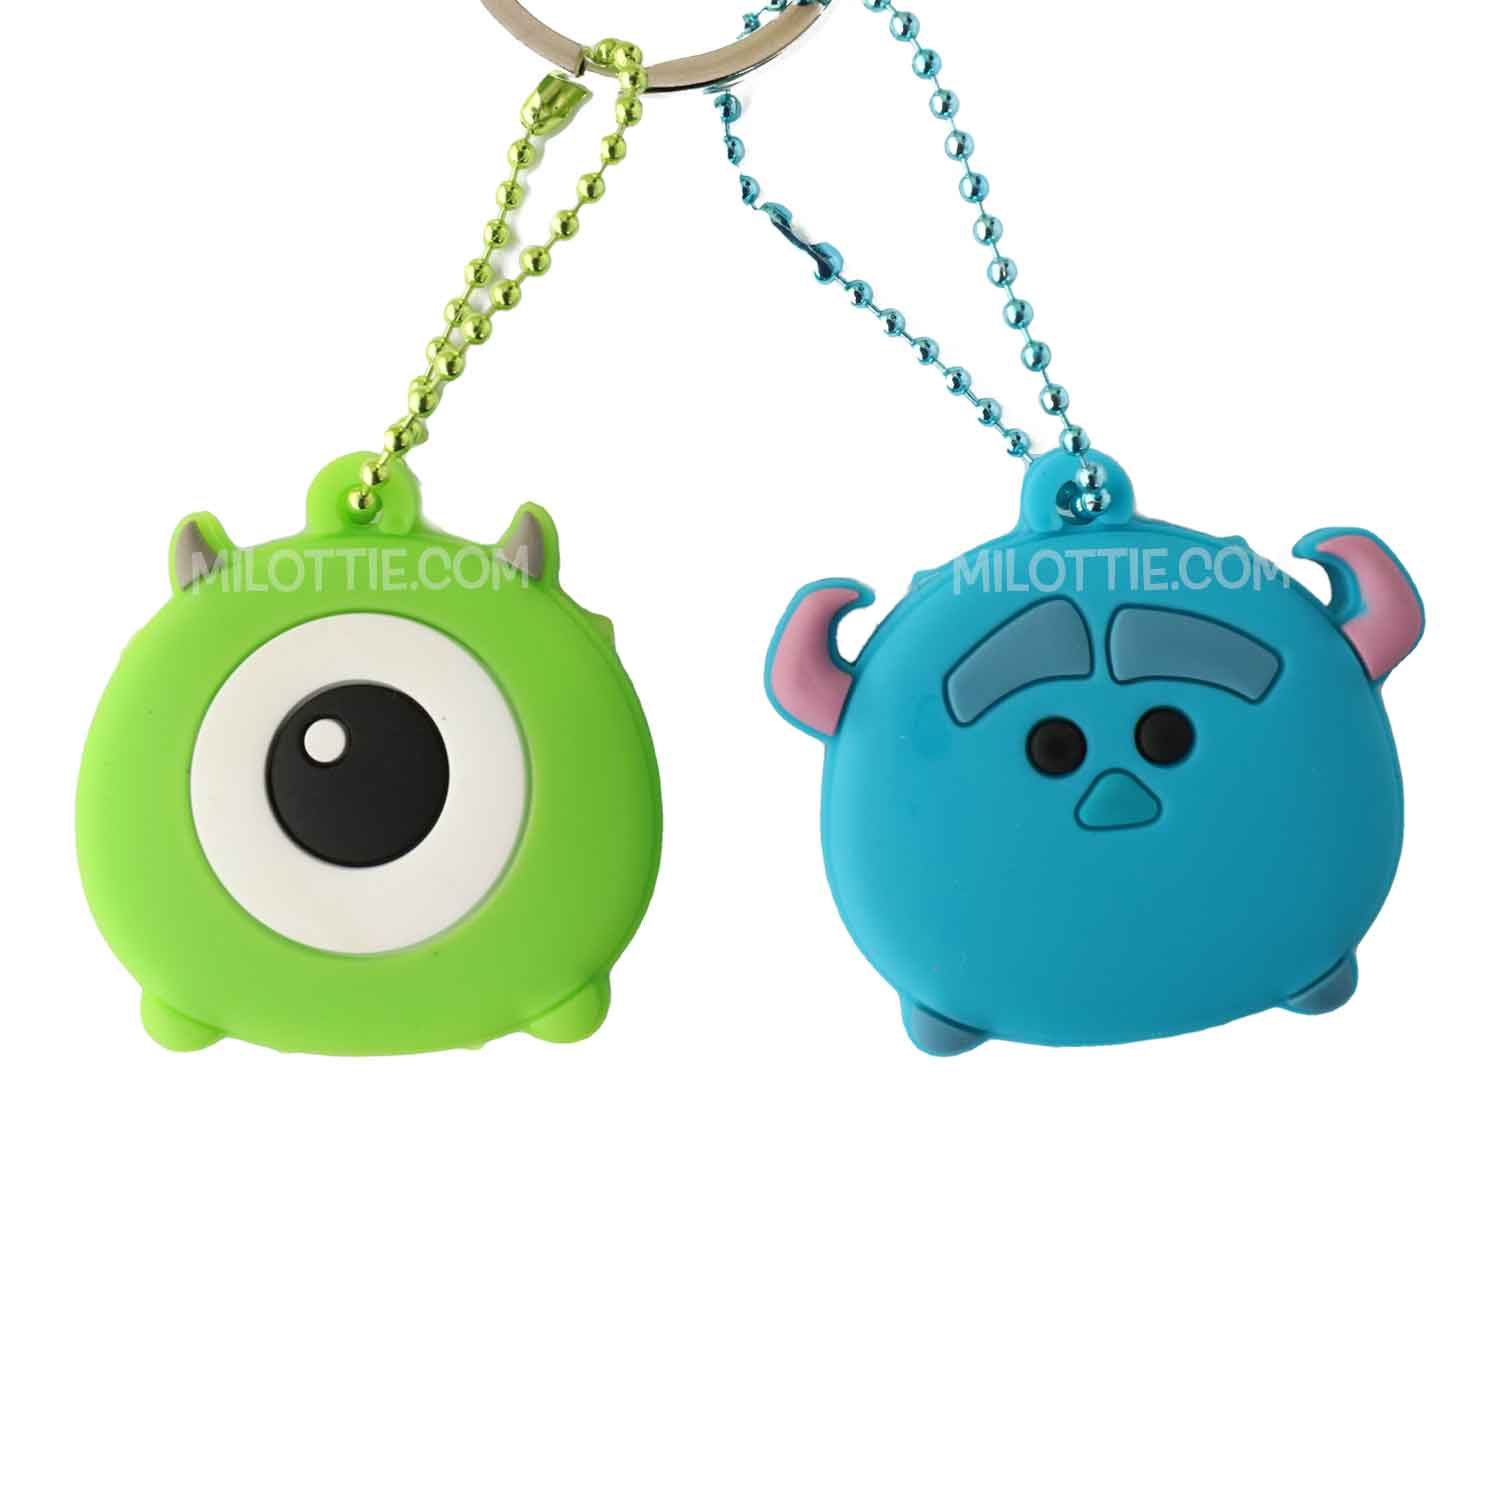 Mikey and sulley monster key covers - Milottie